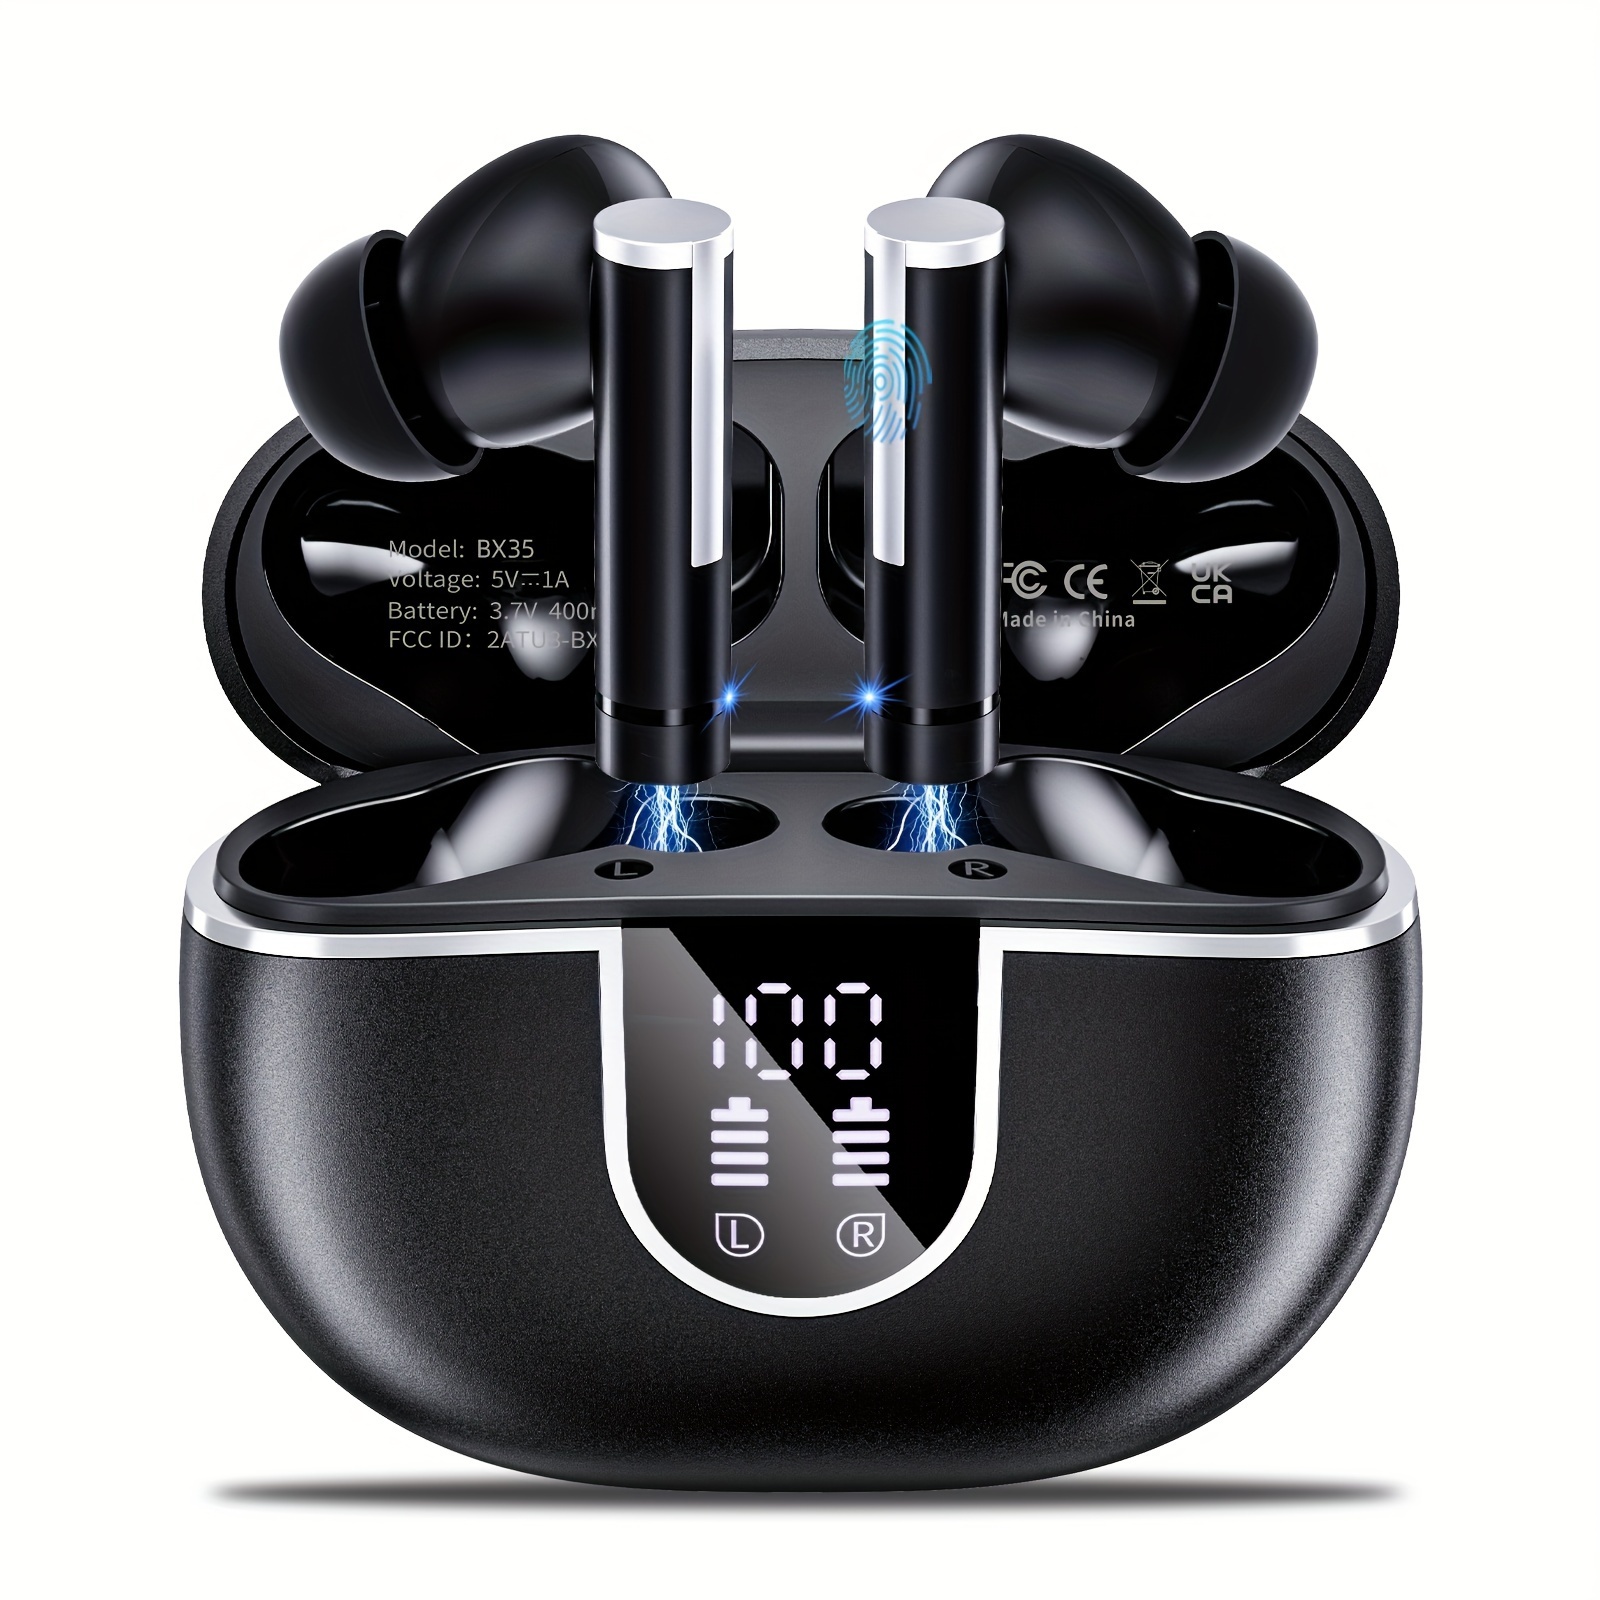 Ecouteurs intra-auriculaires avec fil Force Play KP Intra Jack 3.5